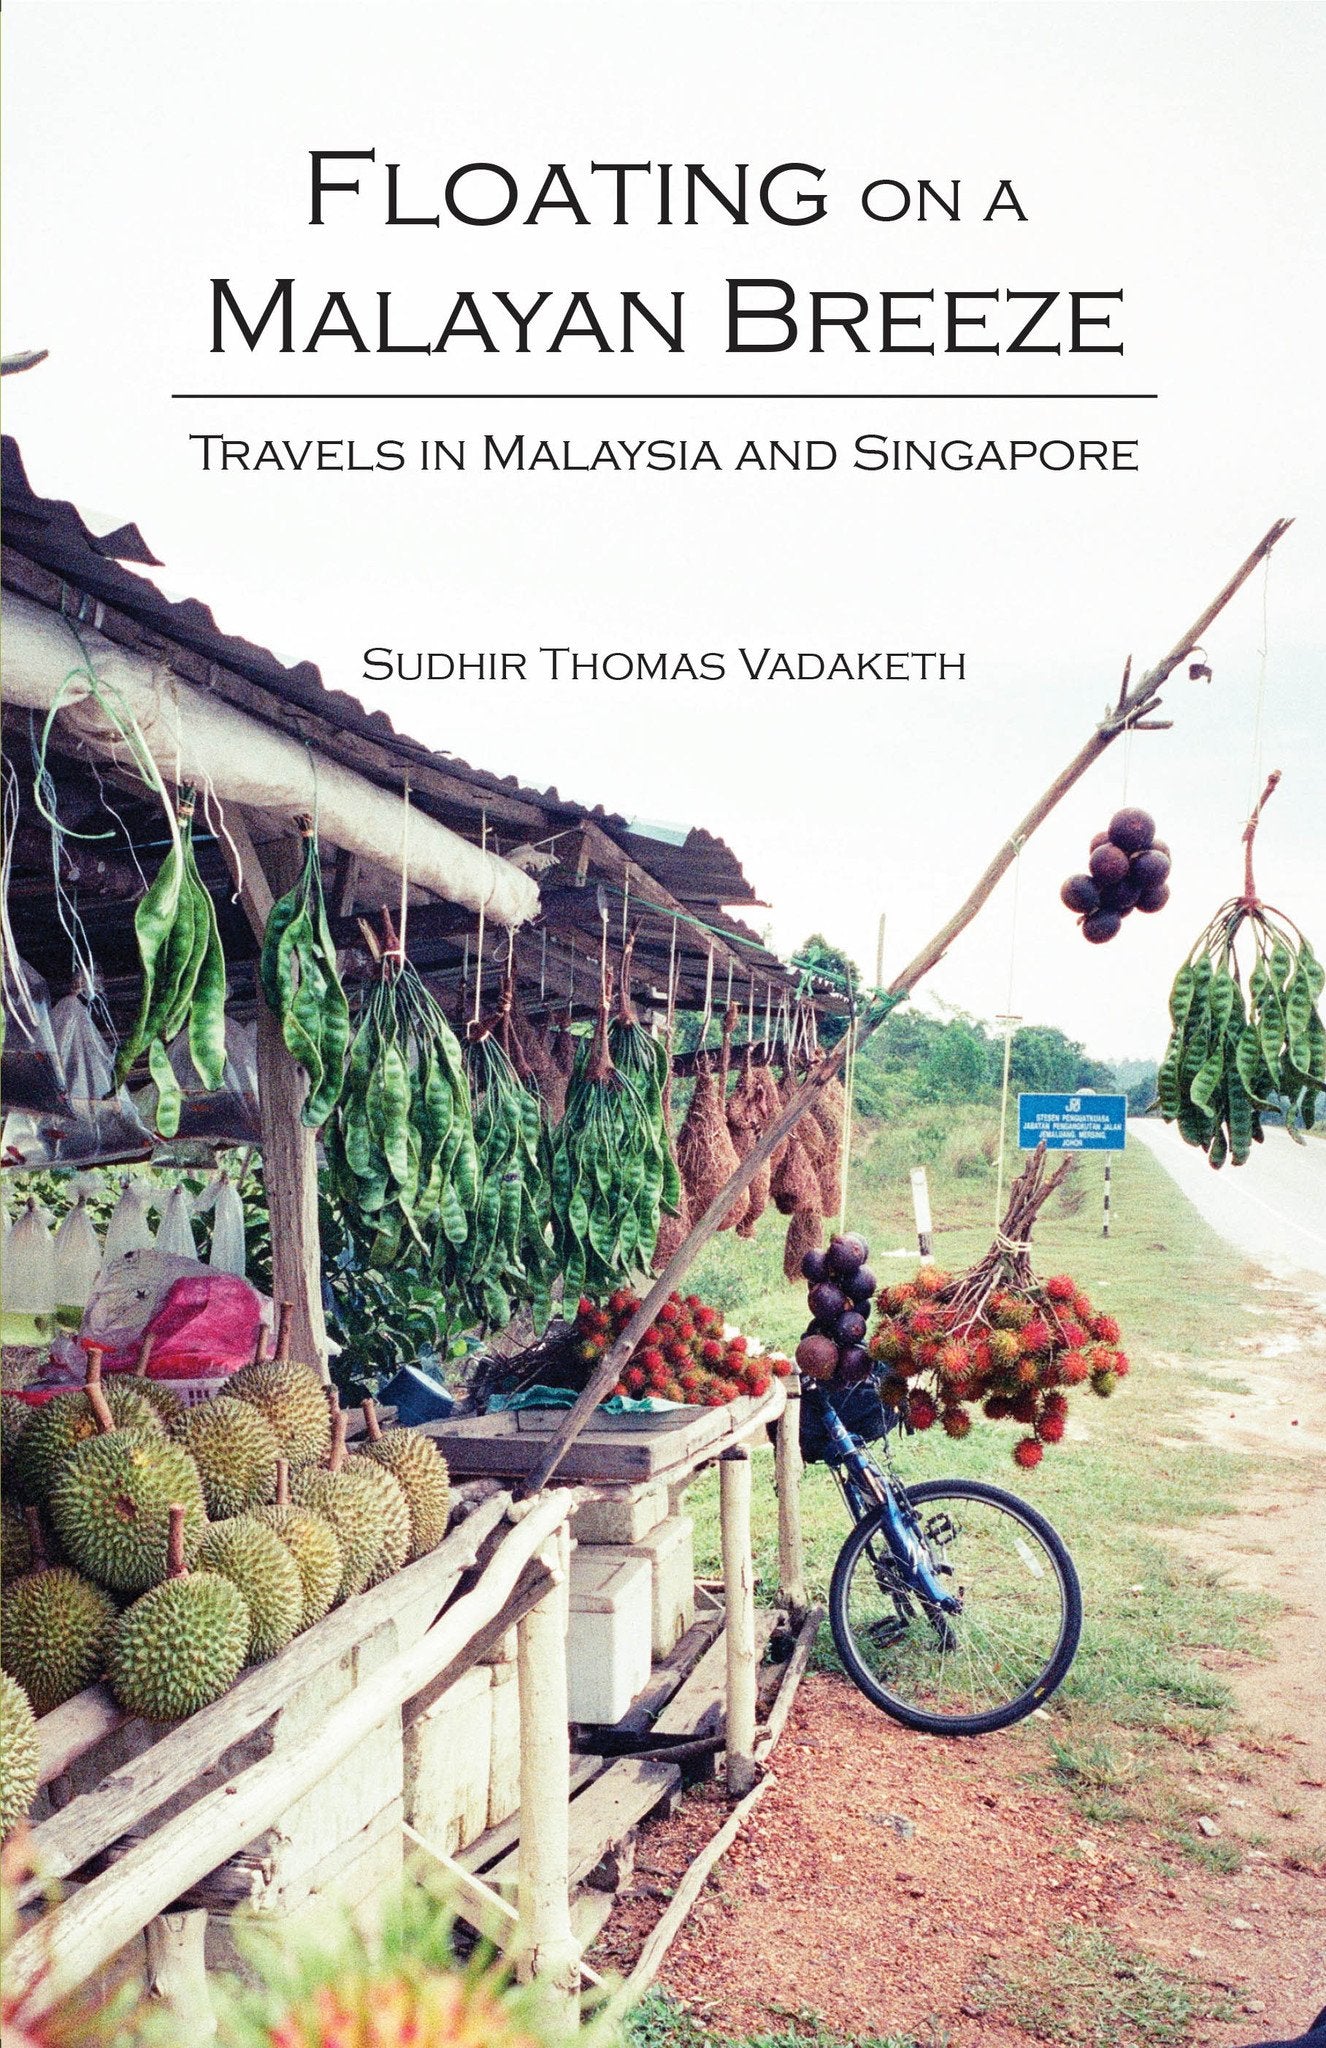 Floating on a Malayan Breeze: Travels in Malaysia and Singapore